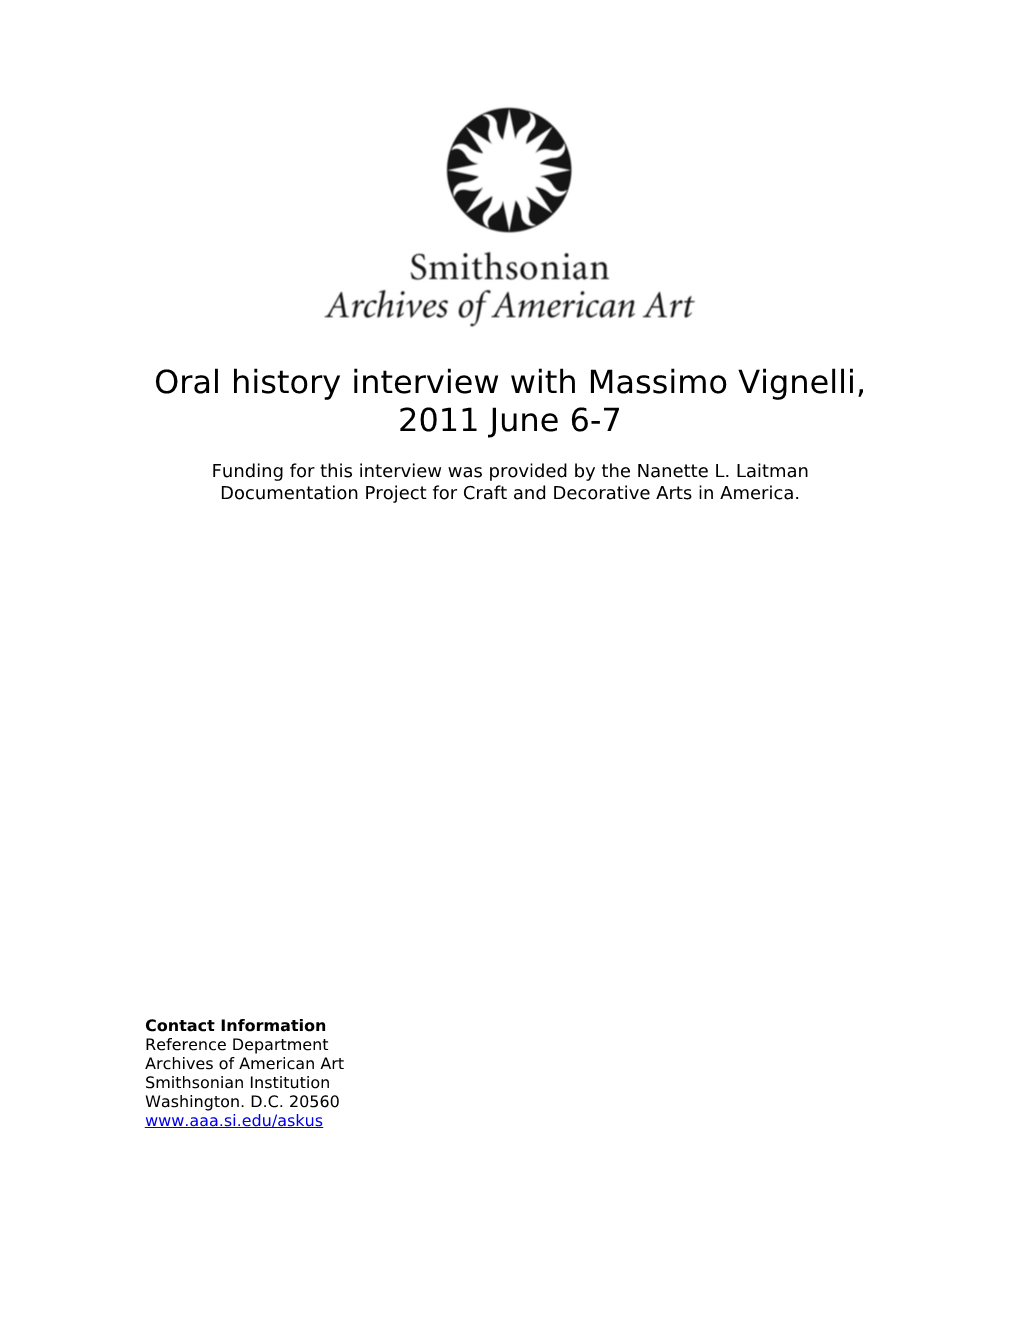 Oral History Interview with Massimo Vignelli, 2011 June 6-7